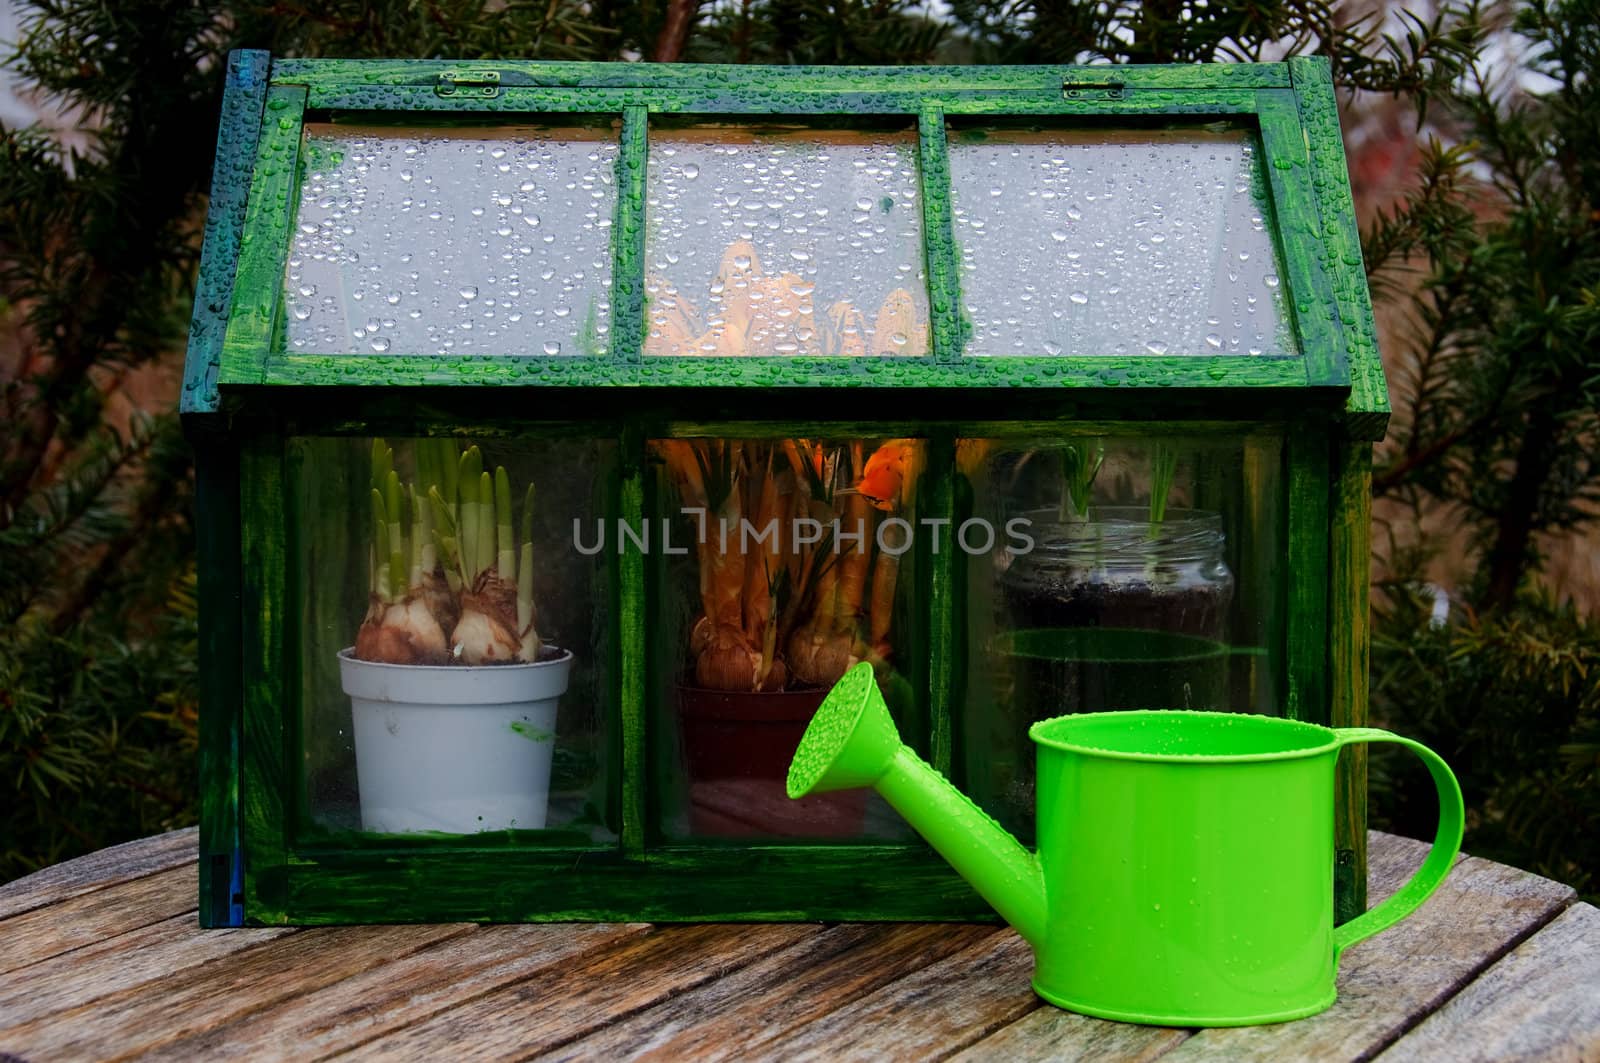 A mini greenhouse and a watering can outside in a garden on a rainy day